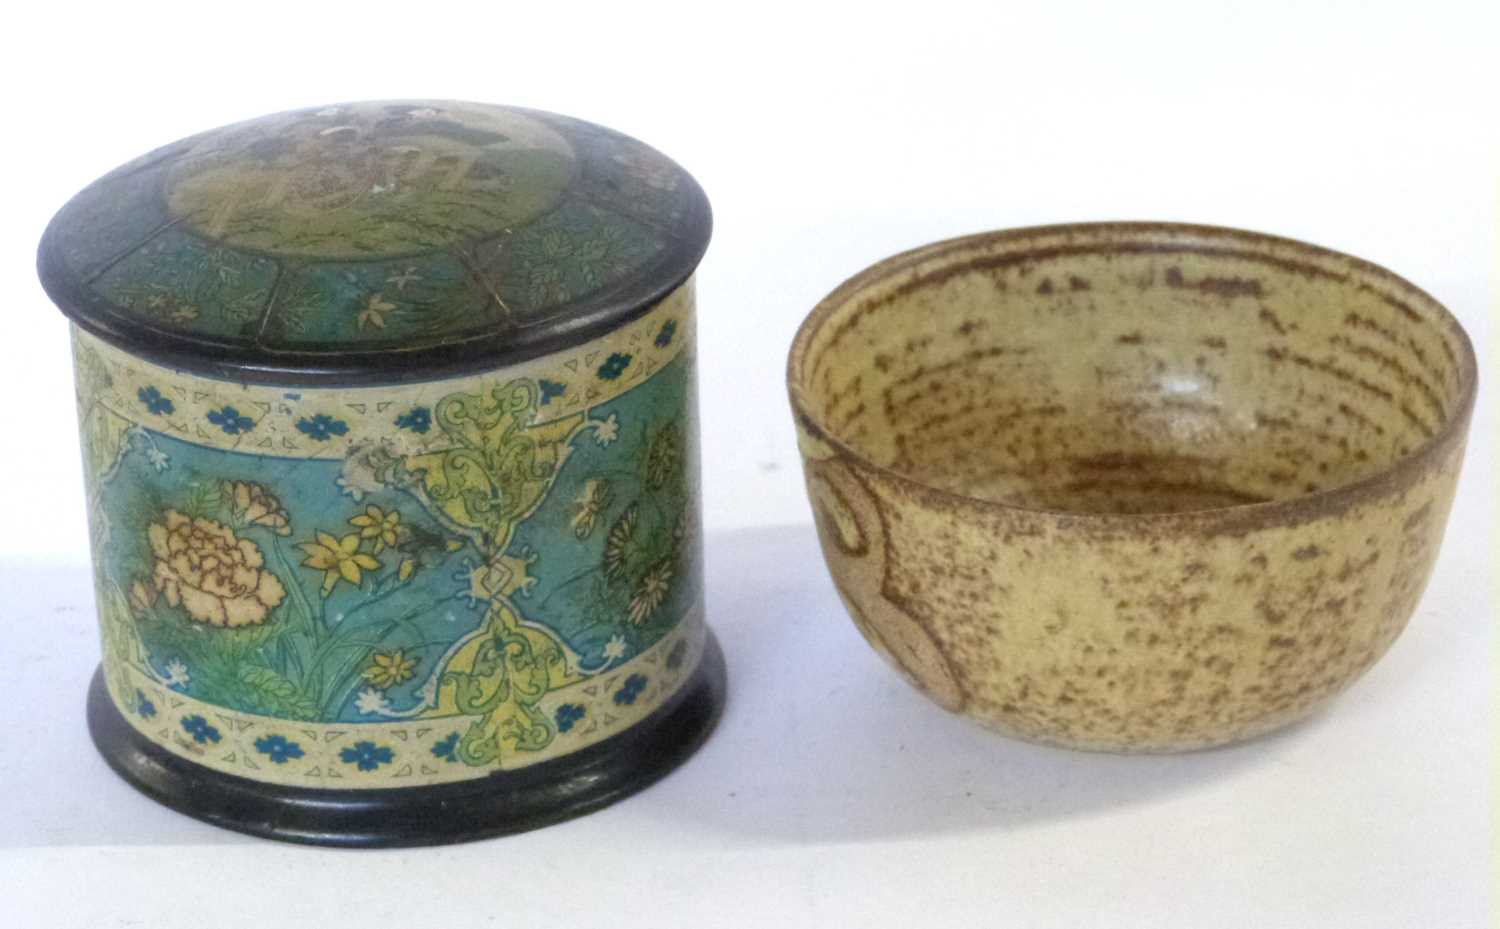 A small Studio Pottery bowl and lacquered tin with printed design